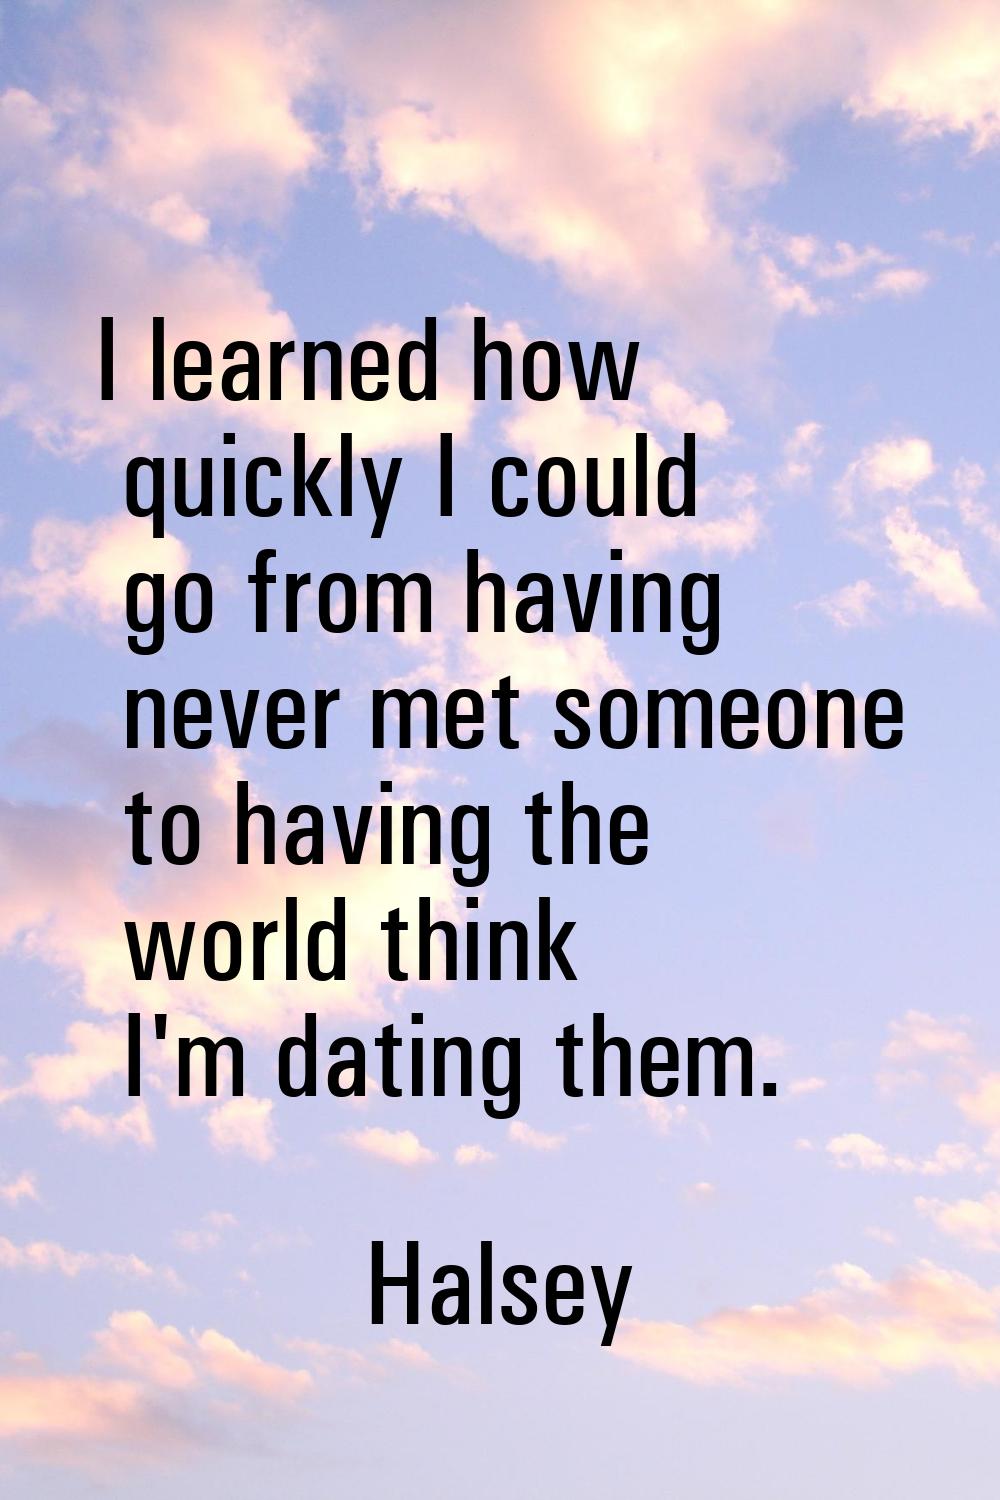 I learned how quickly I could go from having never met someone to having the world think I'm dating